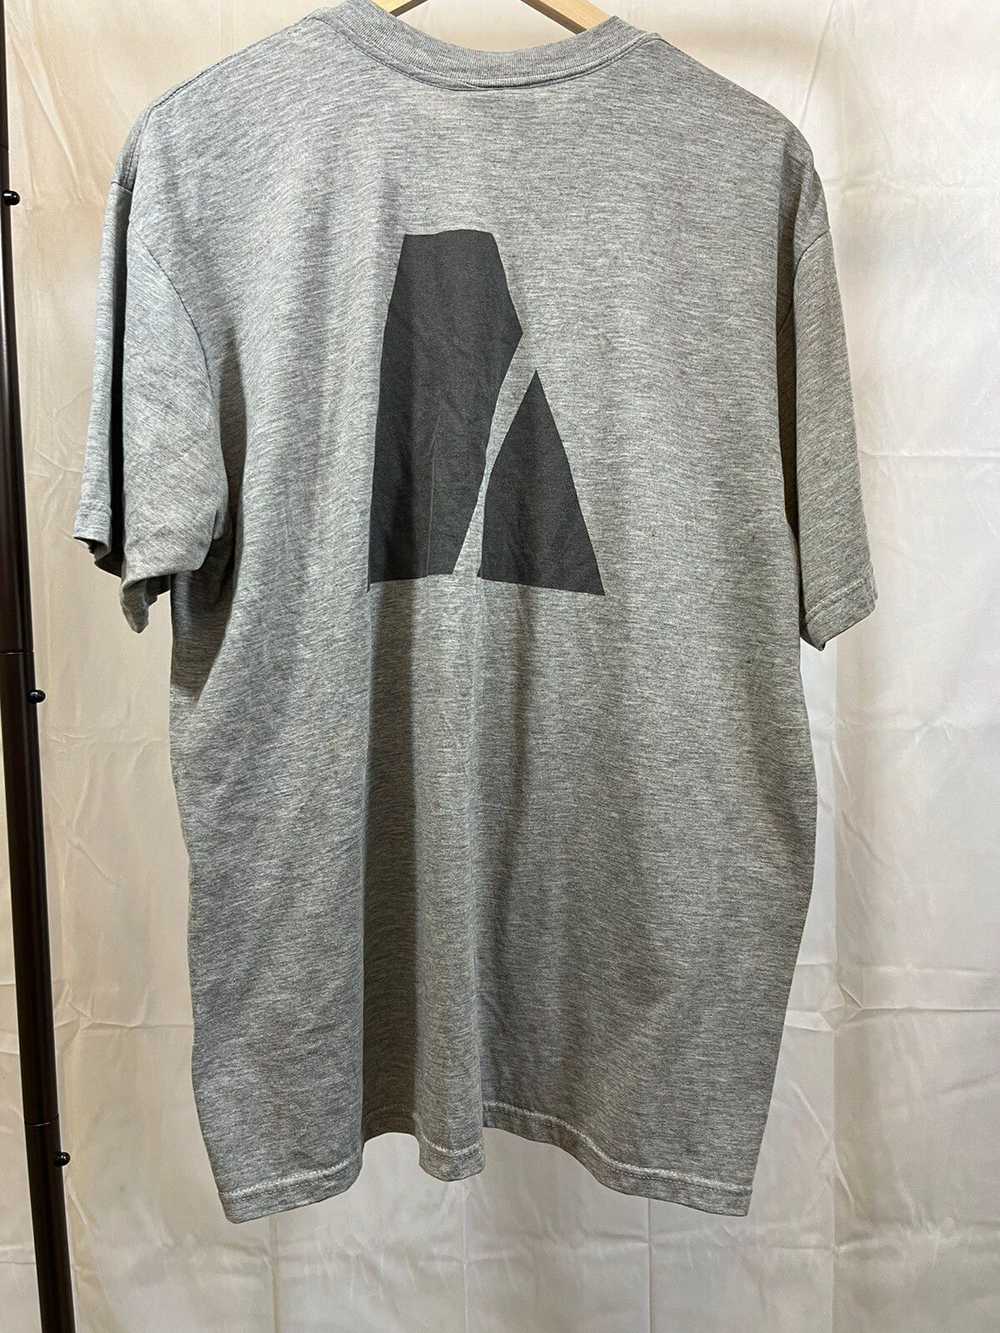 Military × Vintage Vintage ARMY Grey Thin Faded M… - image 8